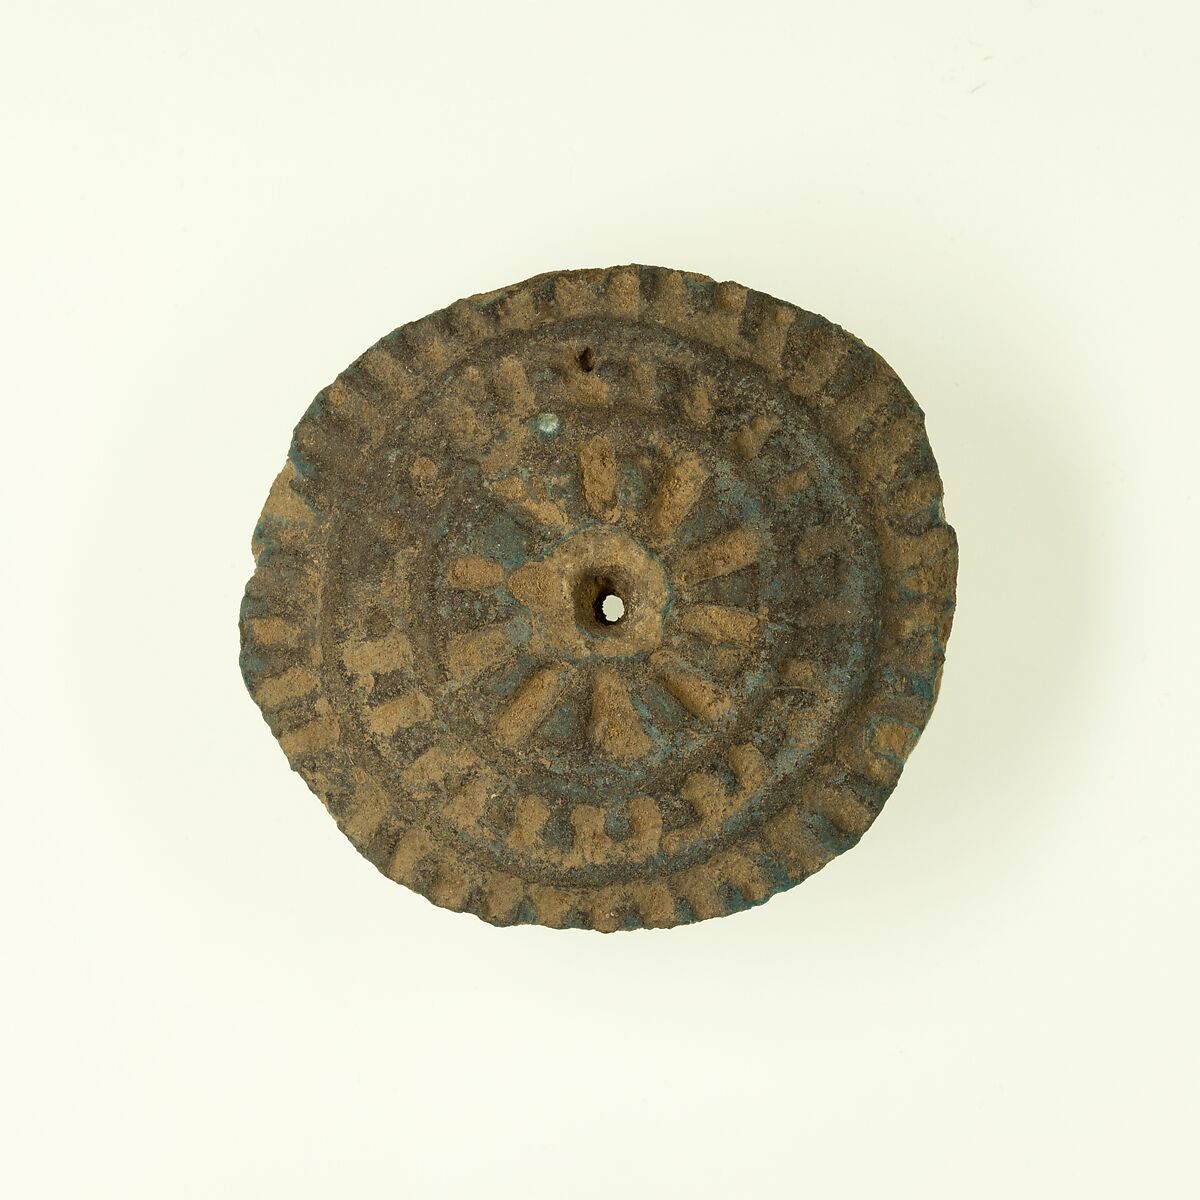 Spindle whorl, Faience 